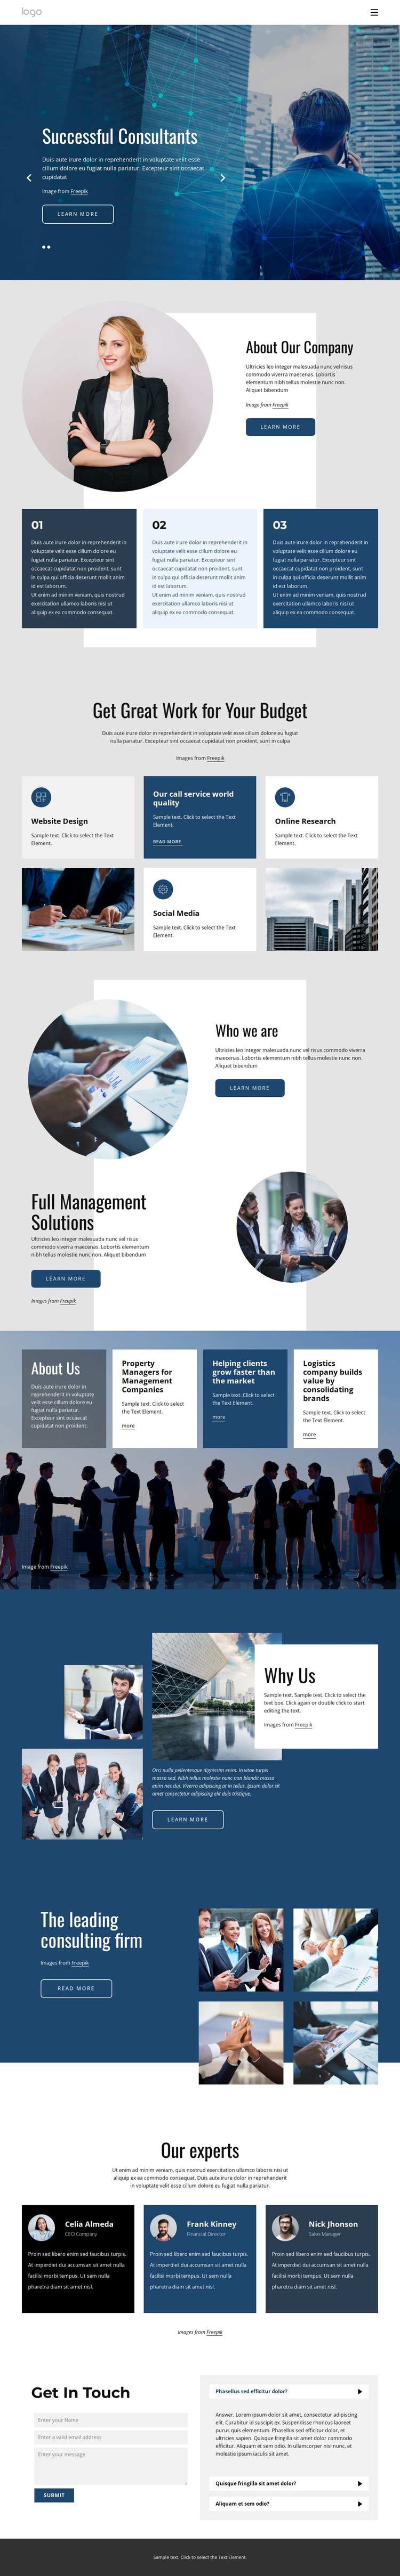 We offer tailored consulting services Web Design